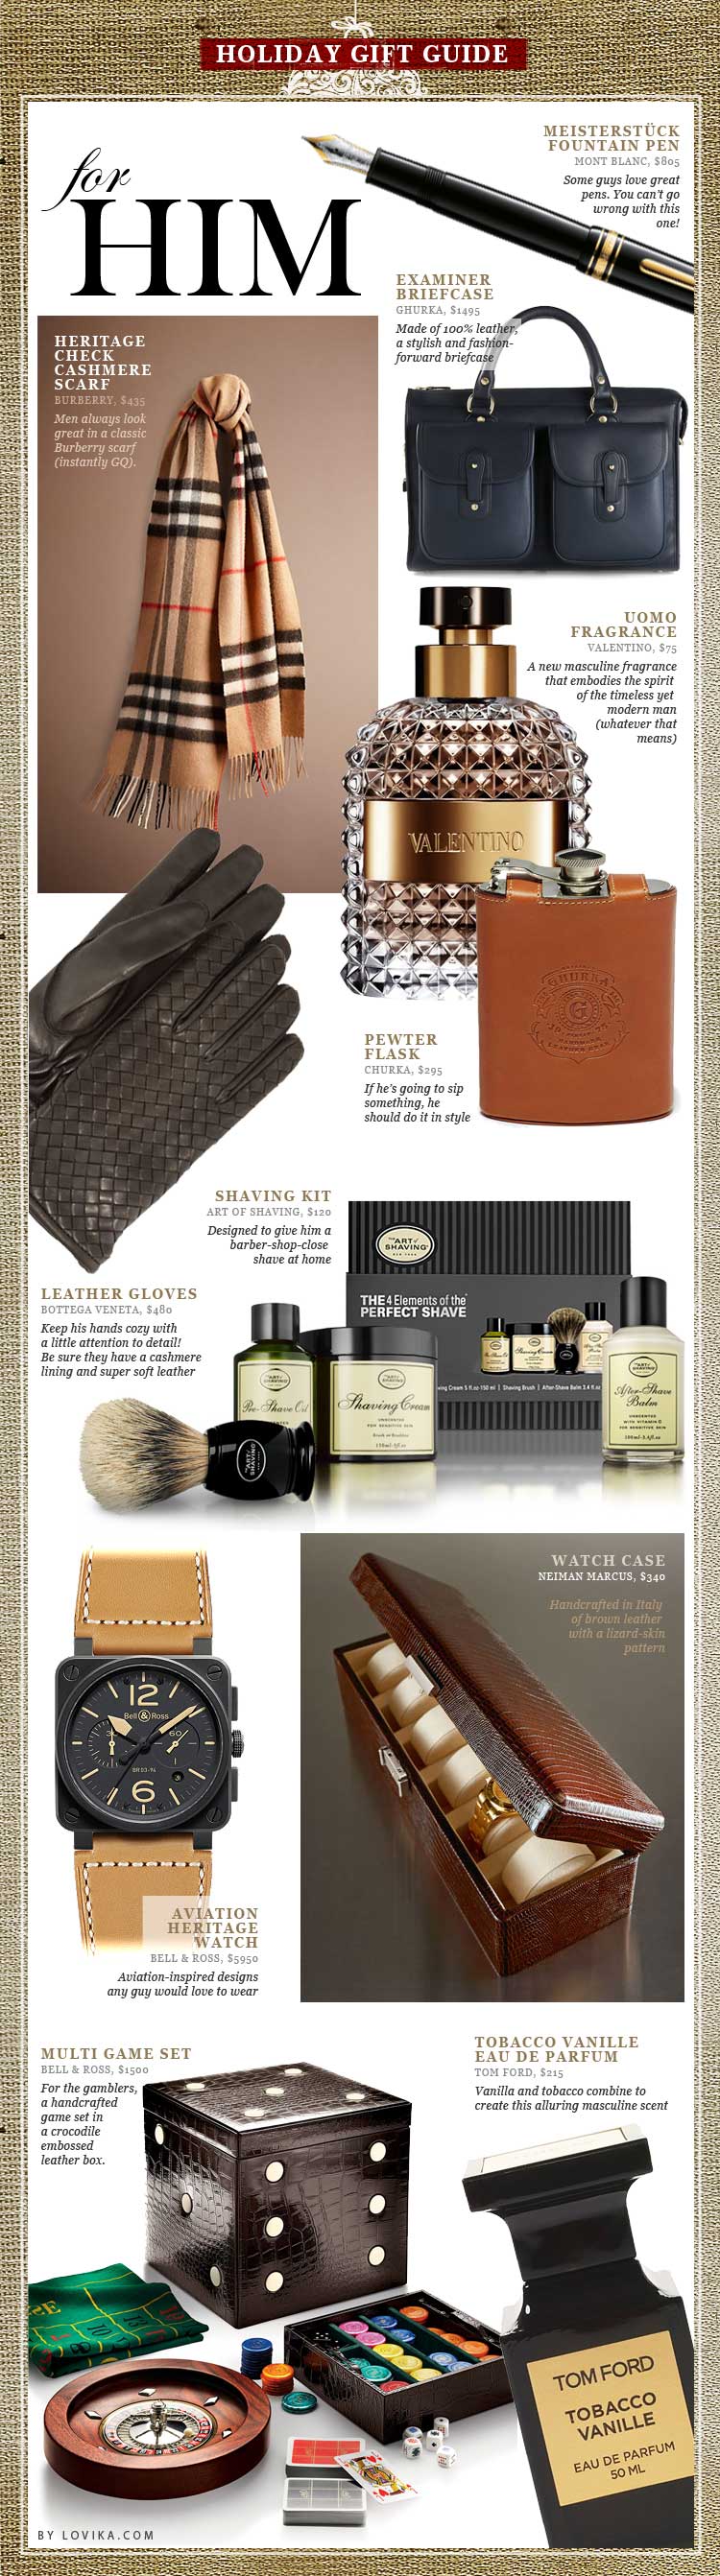 lovika luxury holiday gift guide for him